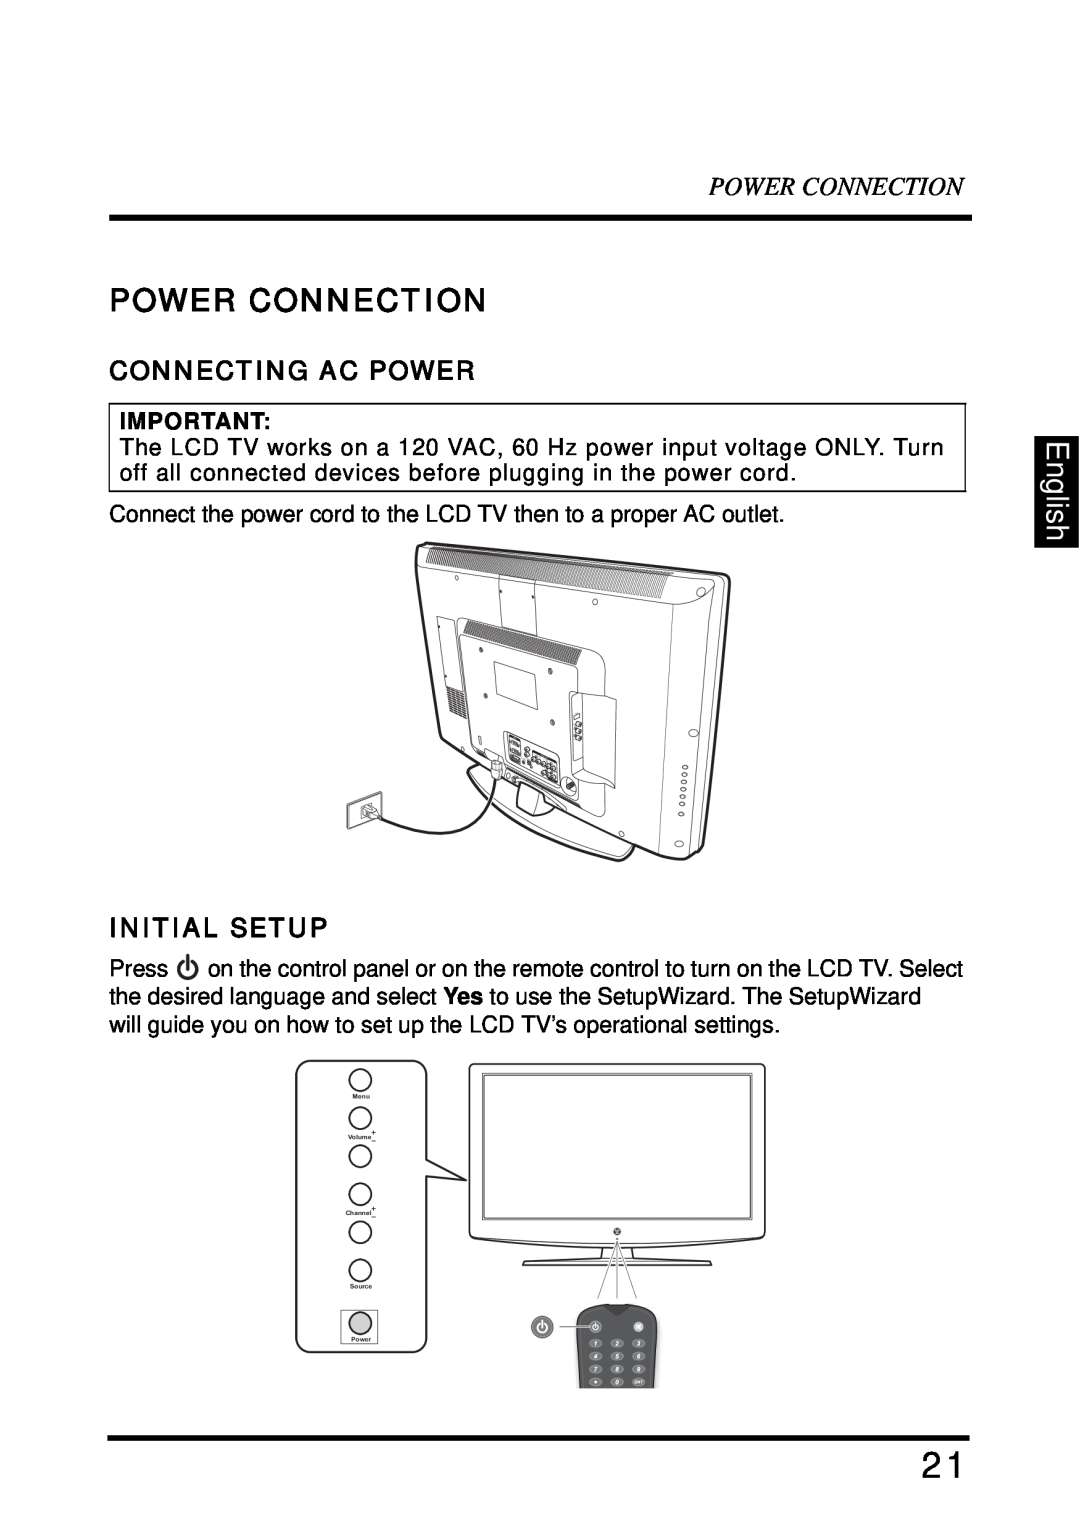 Westinghouse SK-32H640G user manual Power Connection, English, Connecting Ac Power, Initial Setup 